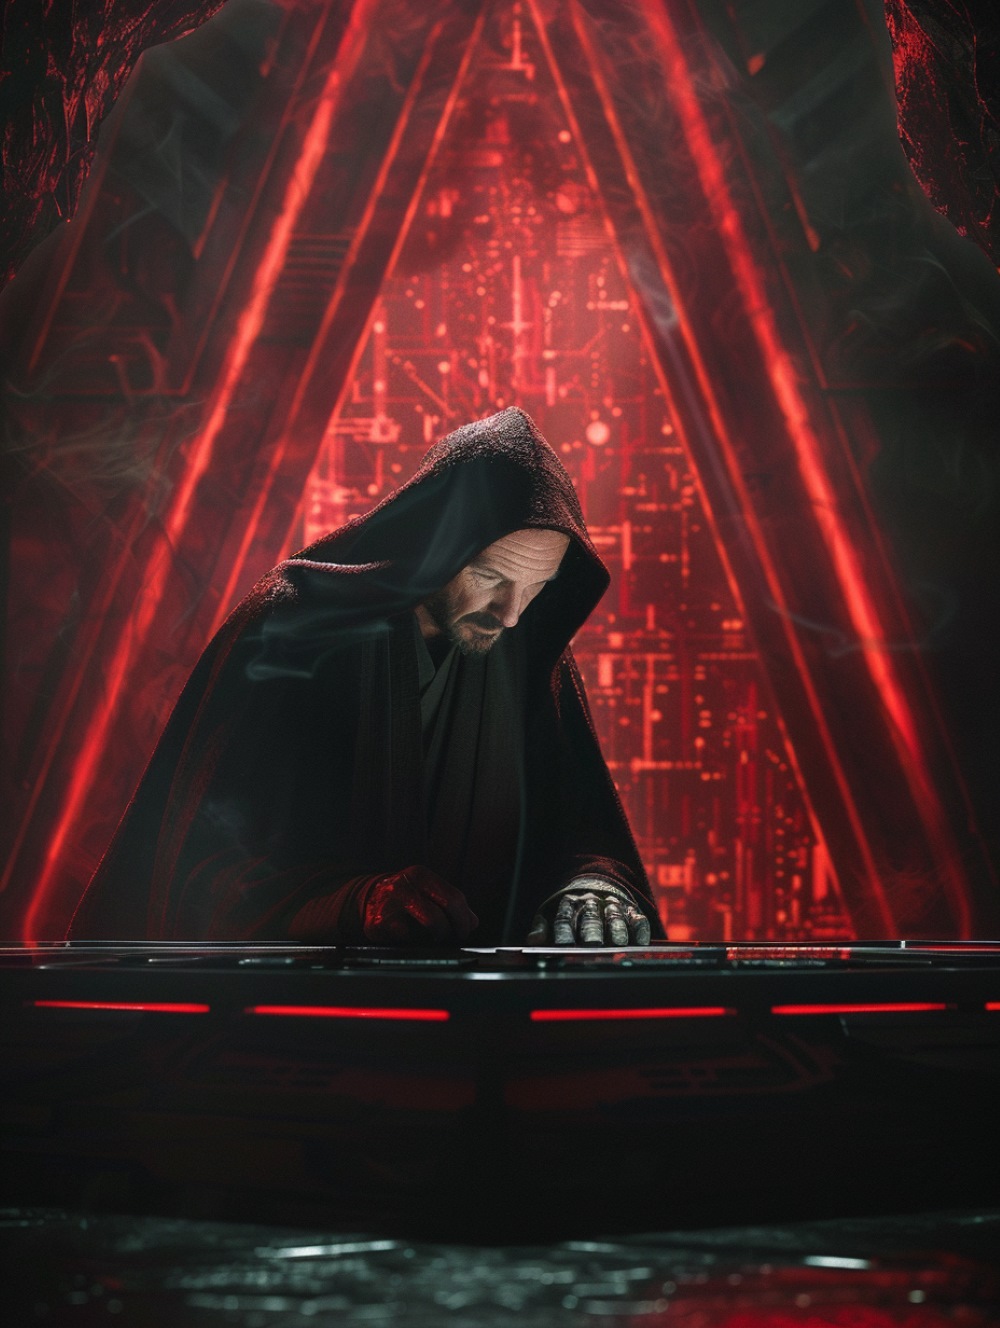 Qui-Gon Jinn would have unraveled Palpatine's sinister secrets earlier